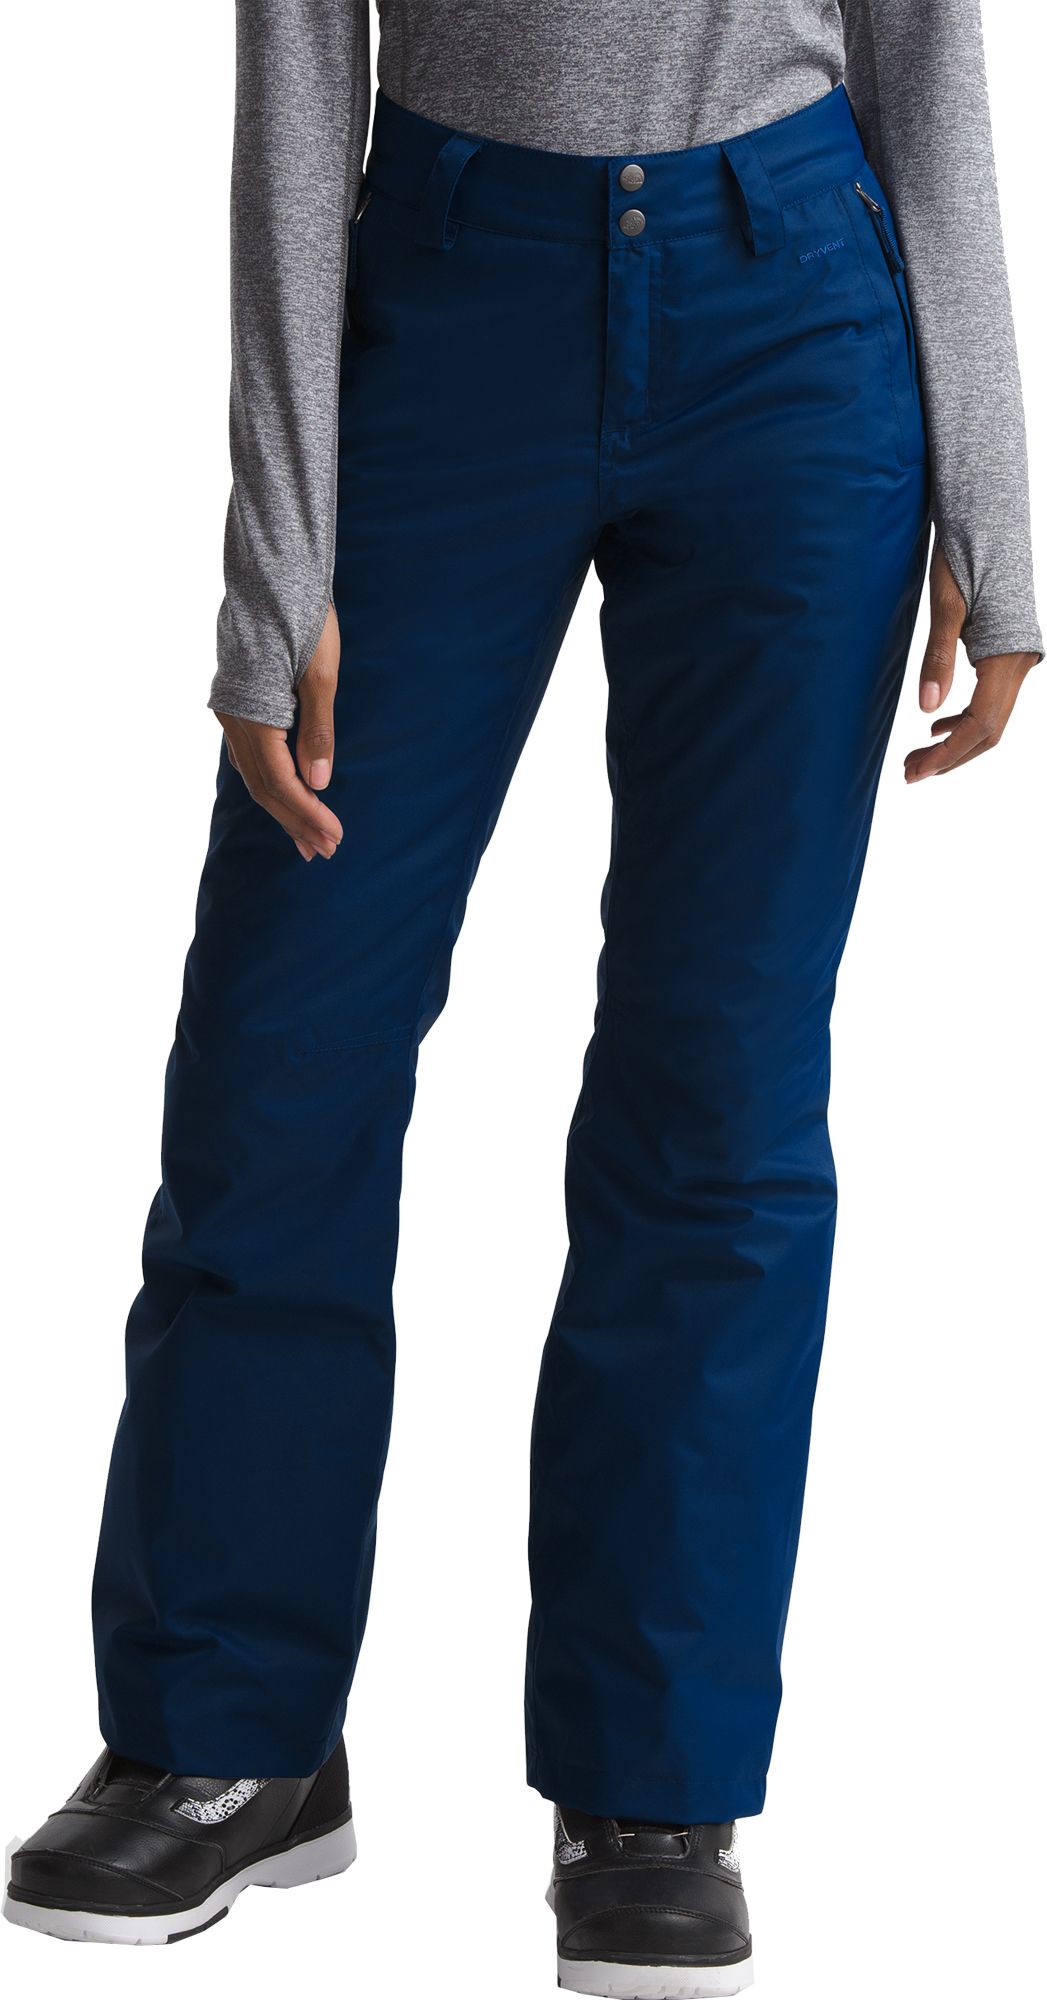 north face women's sally pants sale